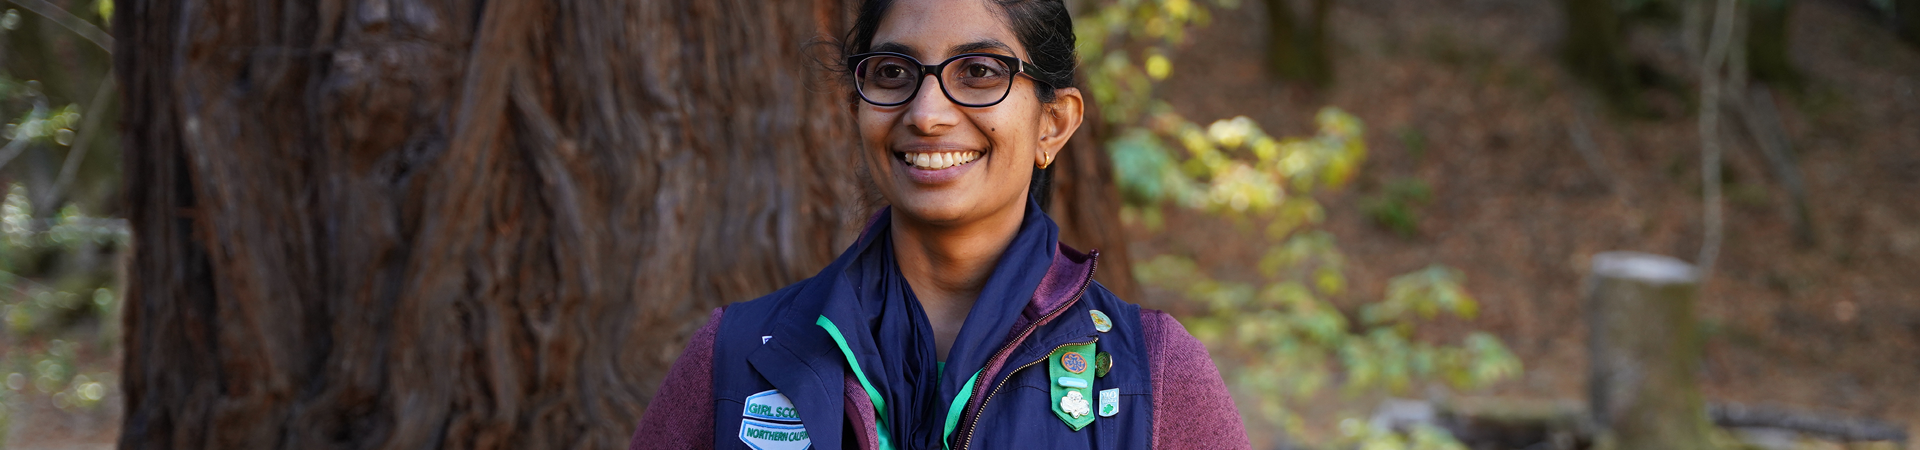  adult woman girl scout volunteer smiling outdoors  